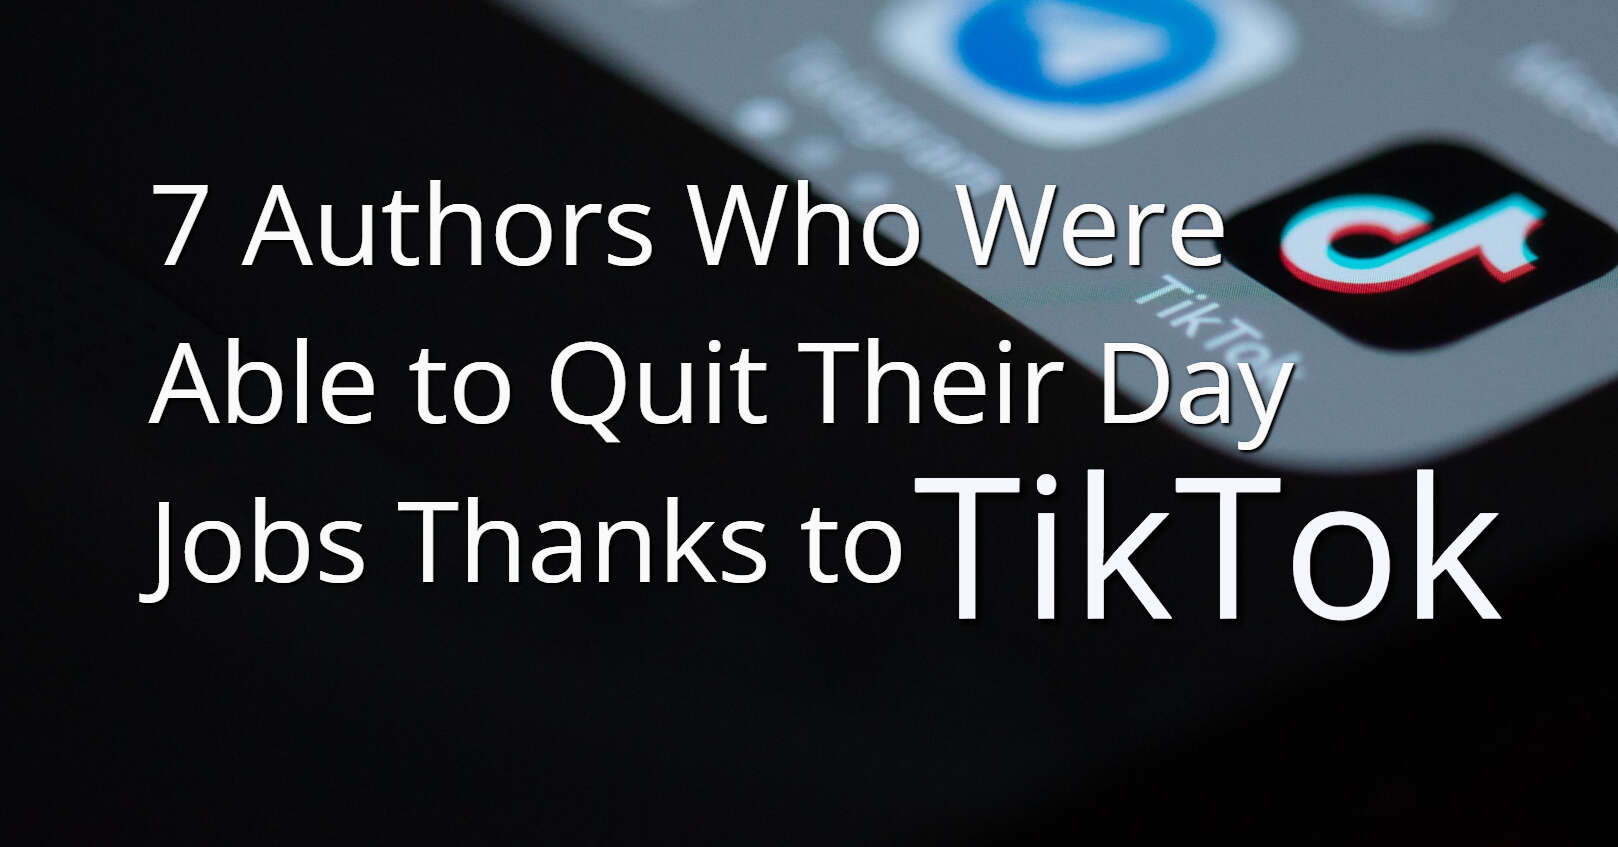 7 Authors Who Were Able to Quit Their Day Jobs Thanks to TikTok